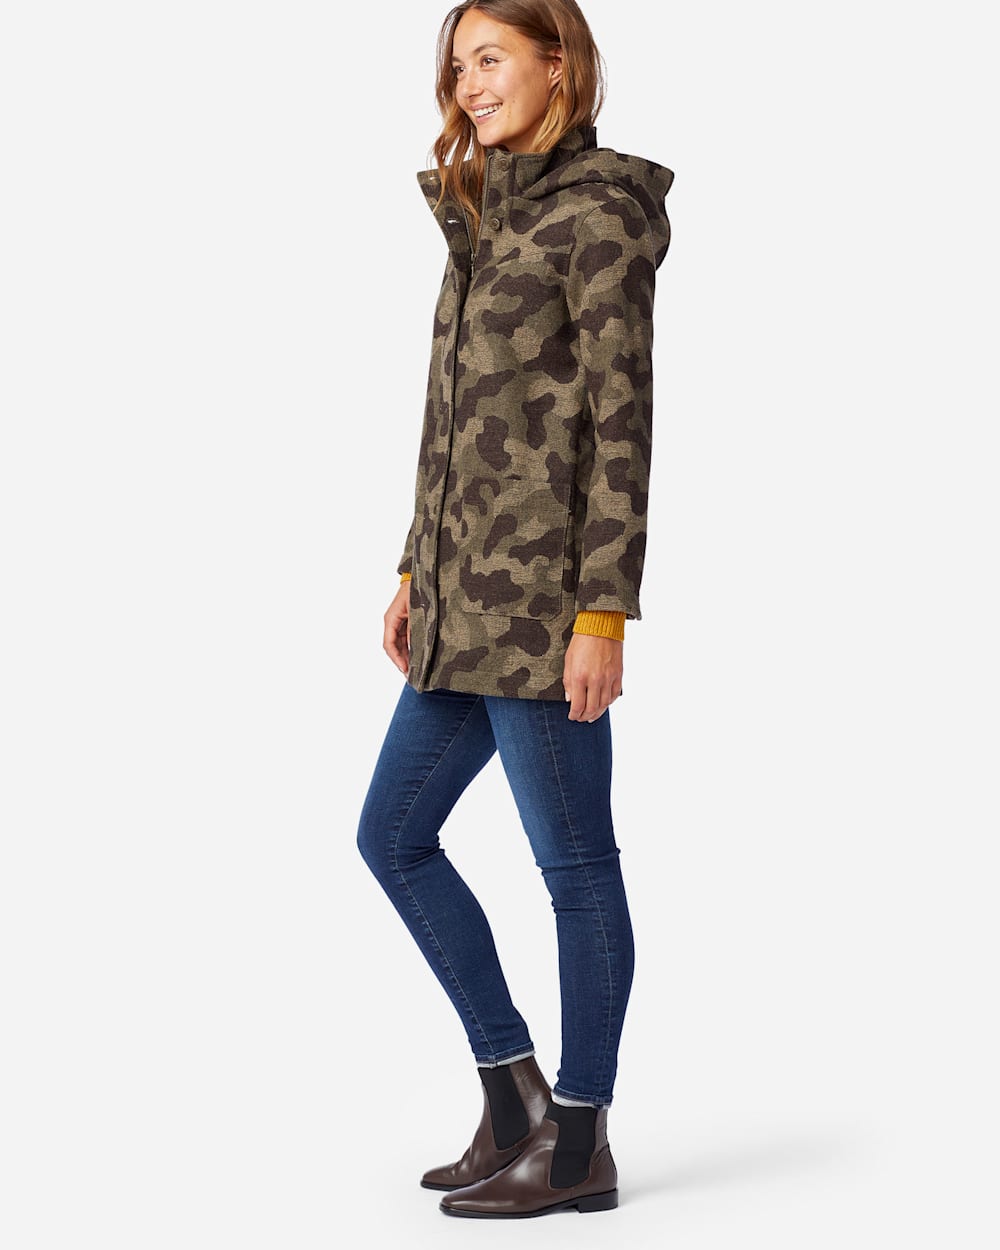 ALTERNATE VIEW OF WOMEN'S WOOL PARKA IN CAMO image number 2